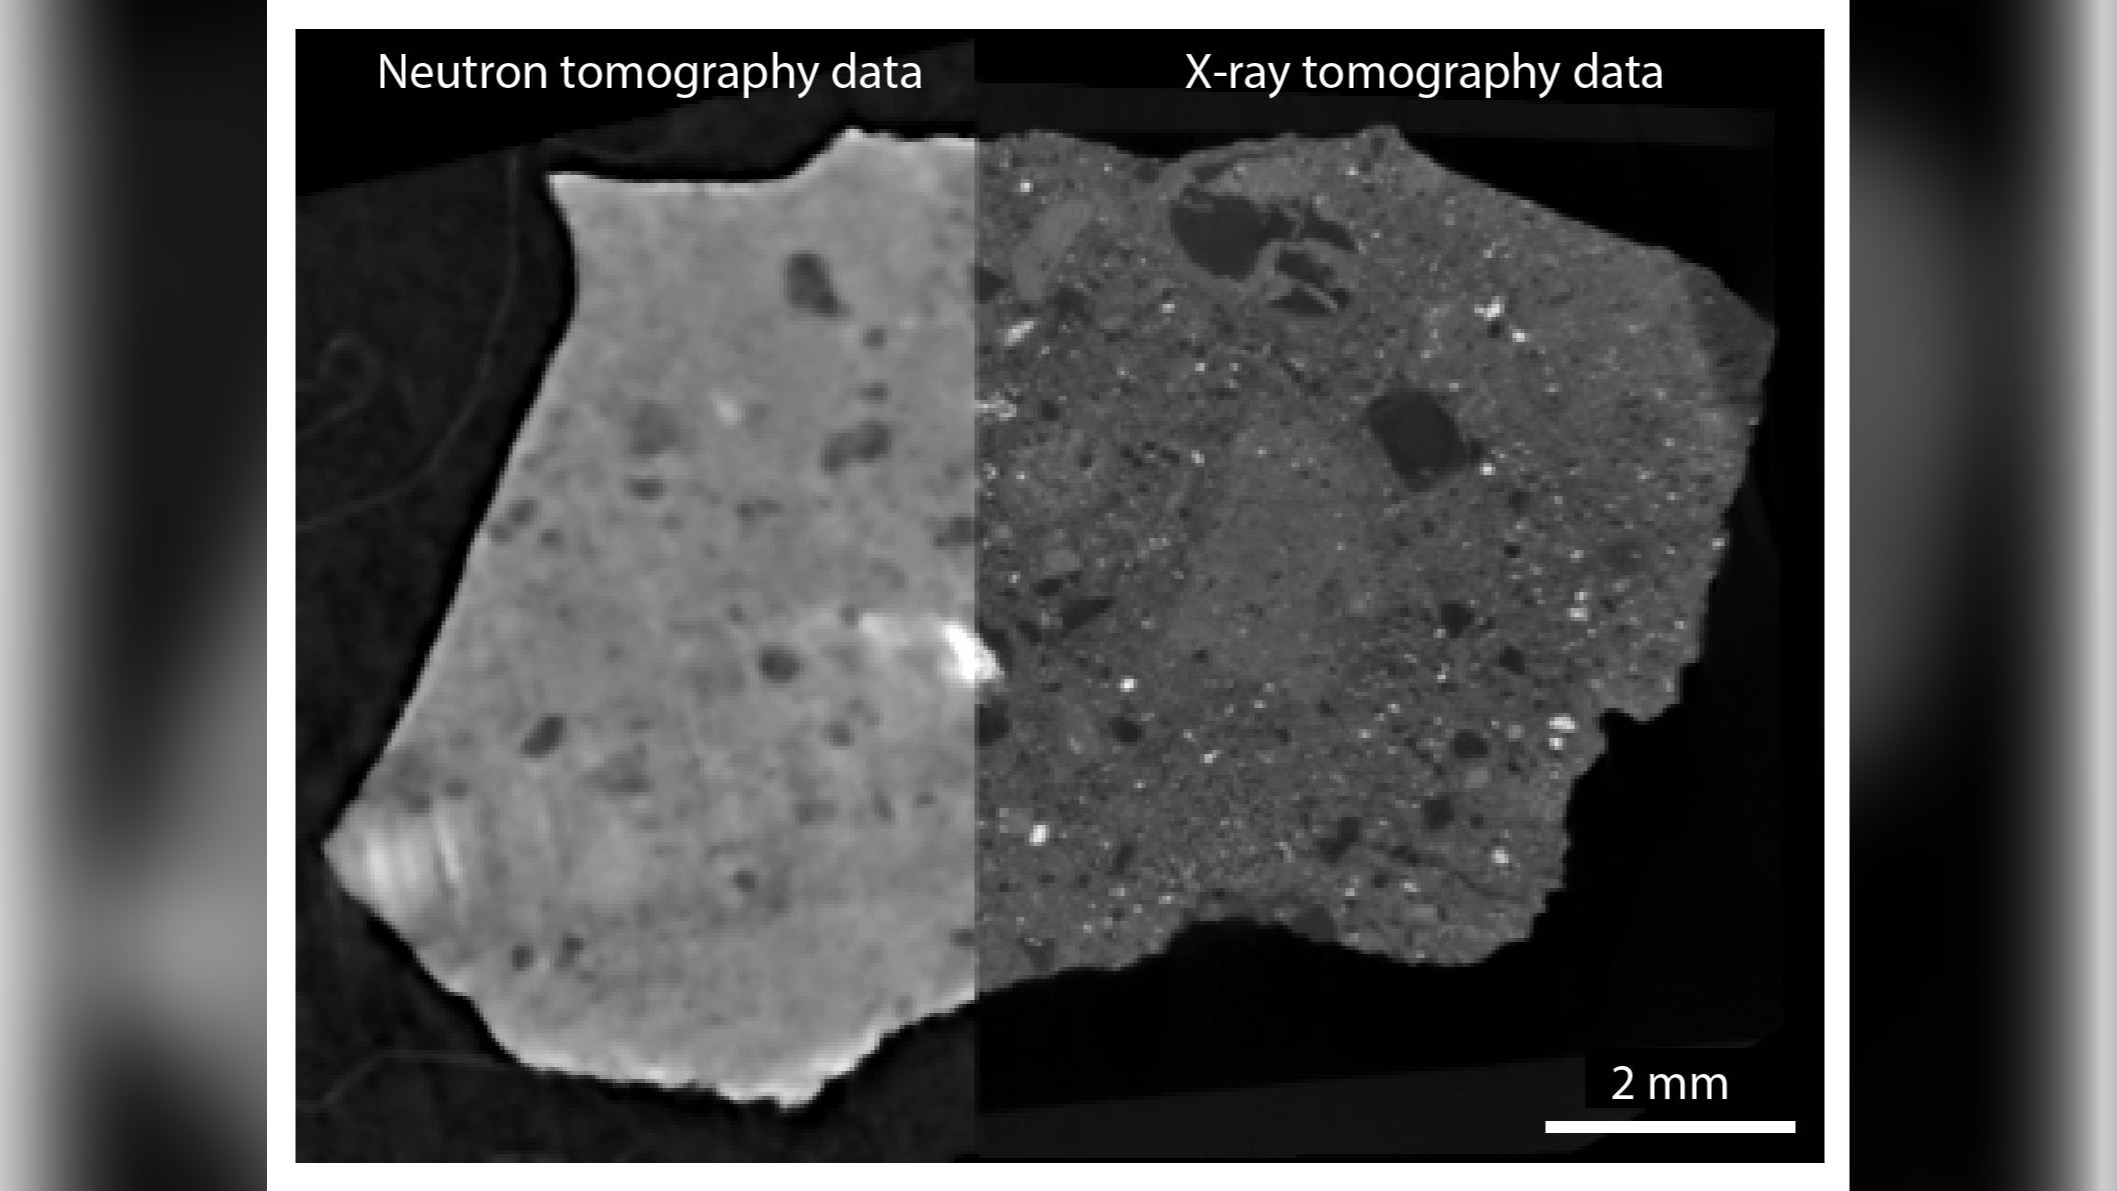 Explore the use of neutron computed tomography for structural analysis of extraterrestrial material through dedicated end-to-end studies of the NWA 7034 "Black Beauty" Mars meteorite